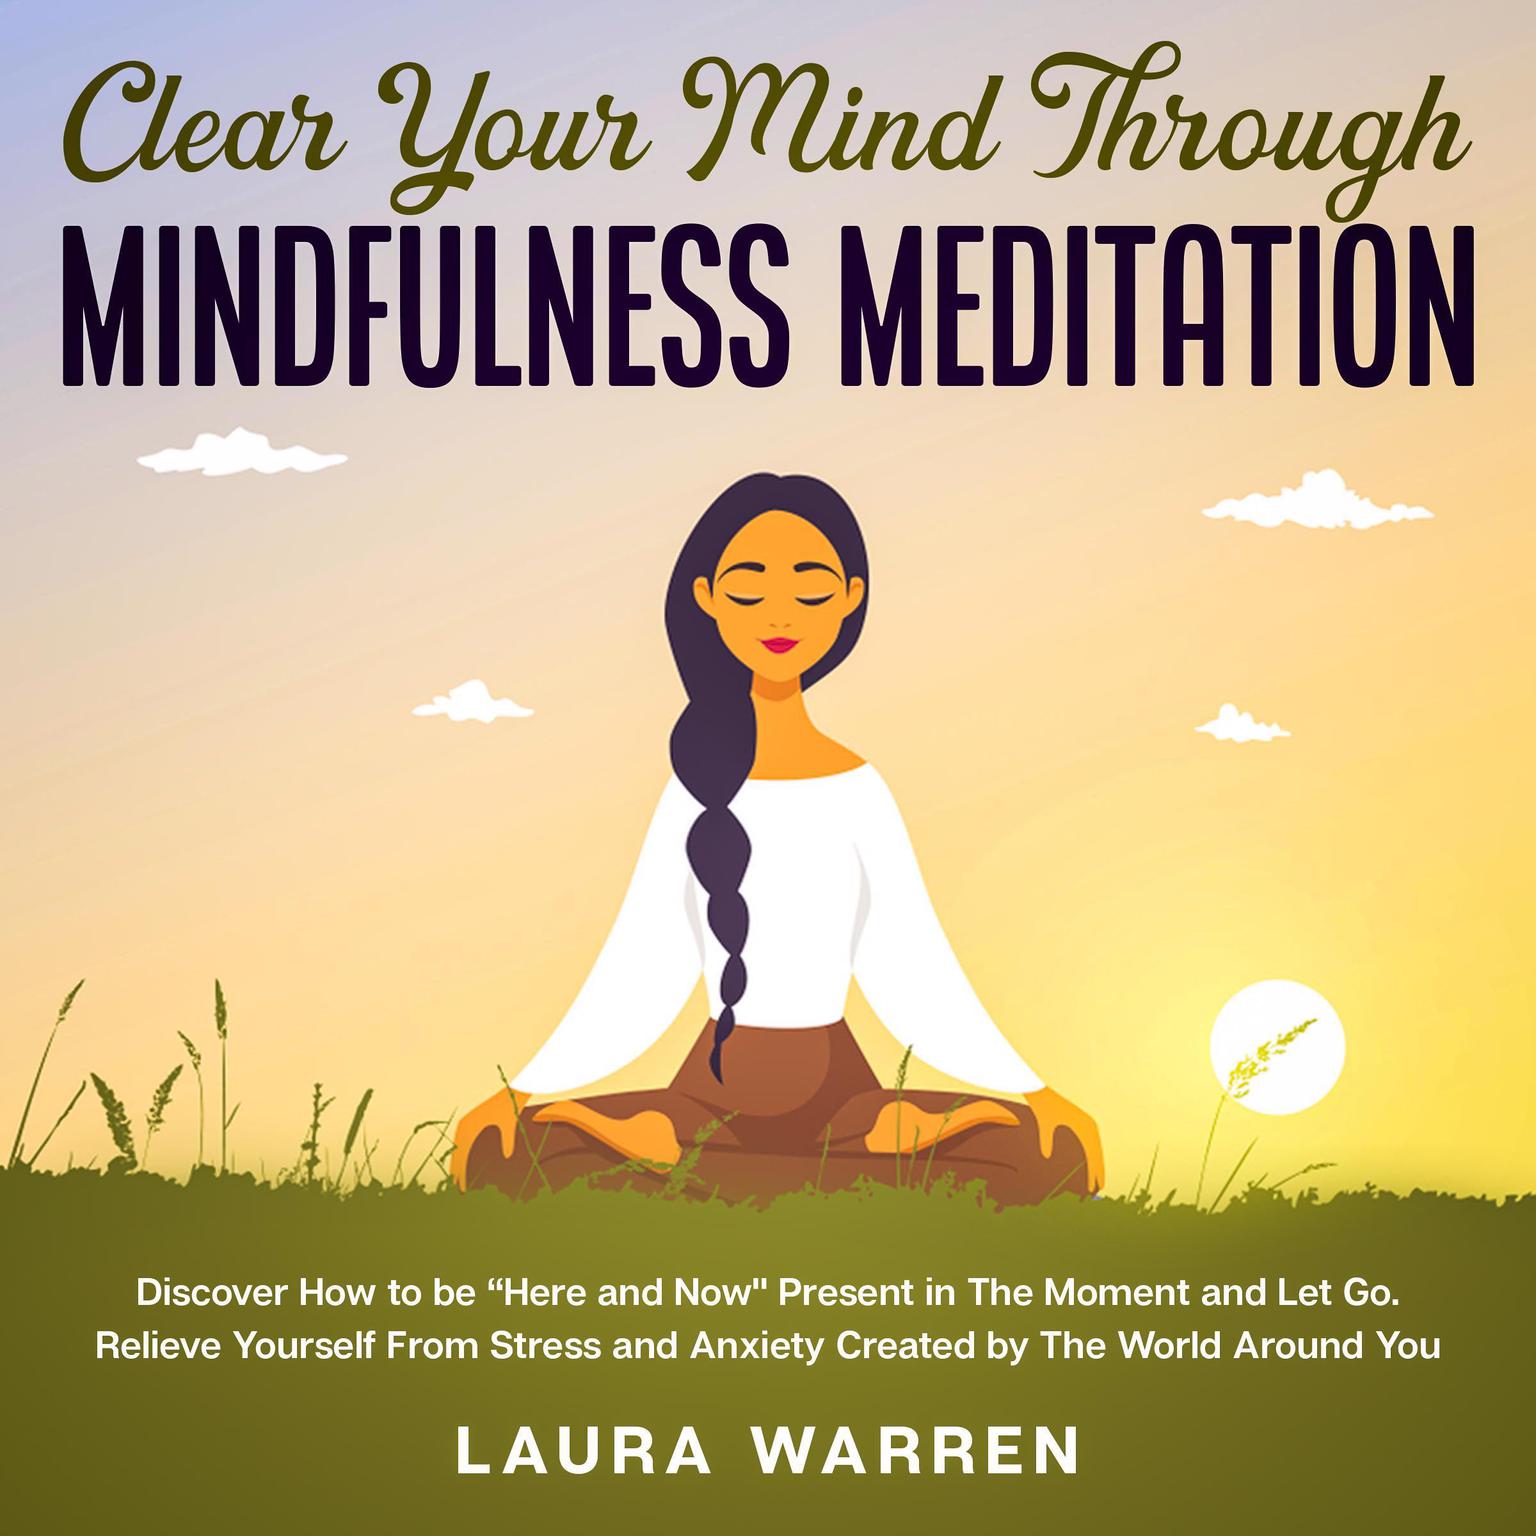 Clear Your Mind Through Mindfulness Meditation Discover How to be “Here and Now Present in The Moment and Let Go: Relieve Yourself From Stress and Anxiety Created by The World Around You Audiobook, by Laura Warren